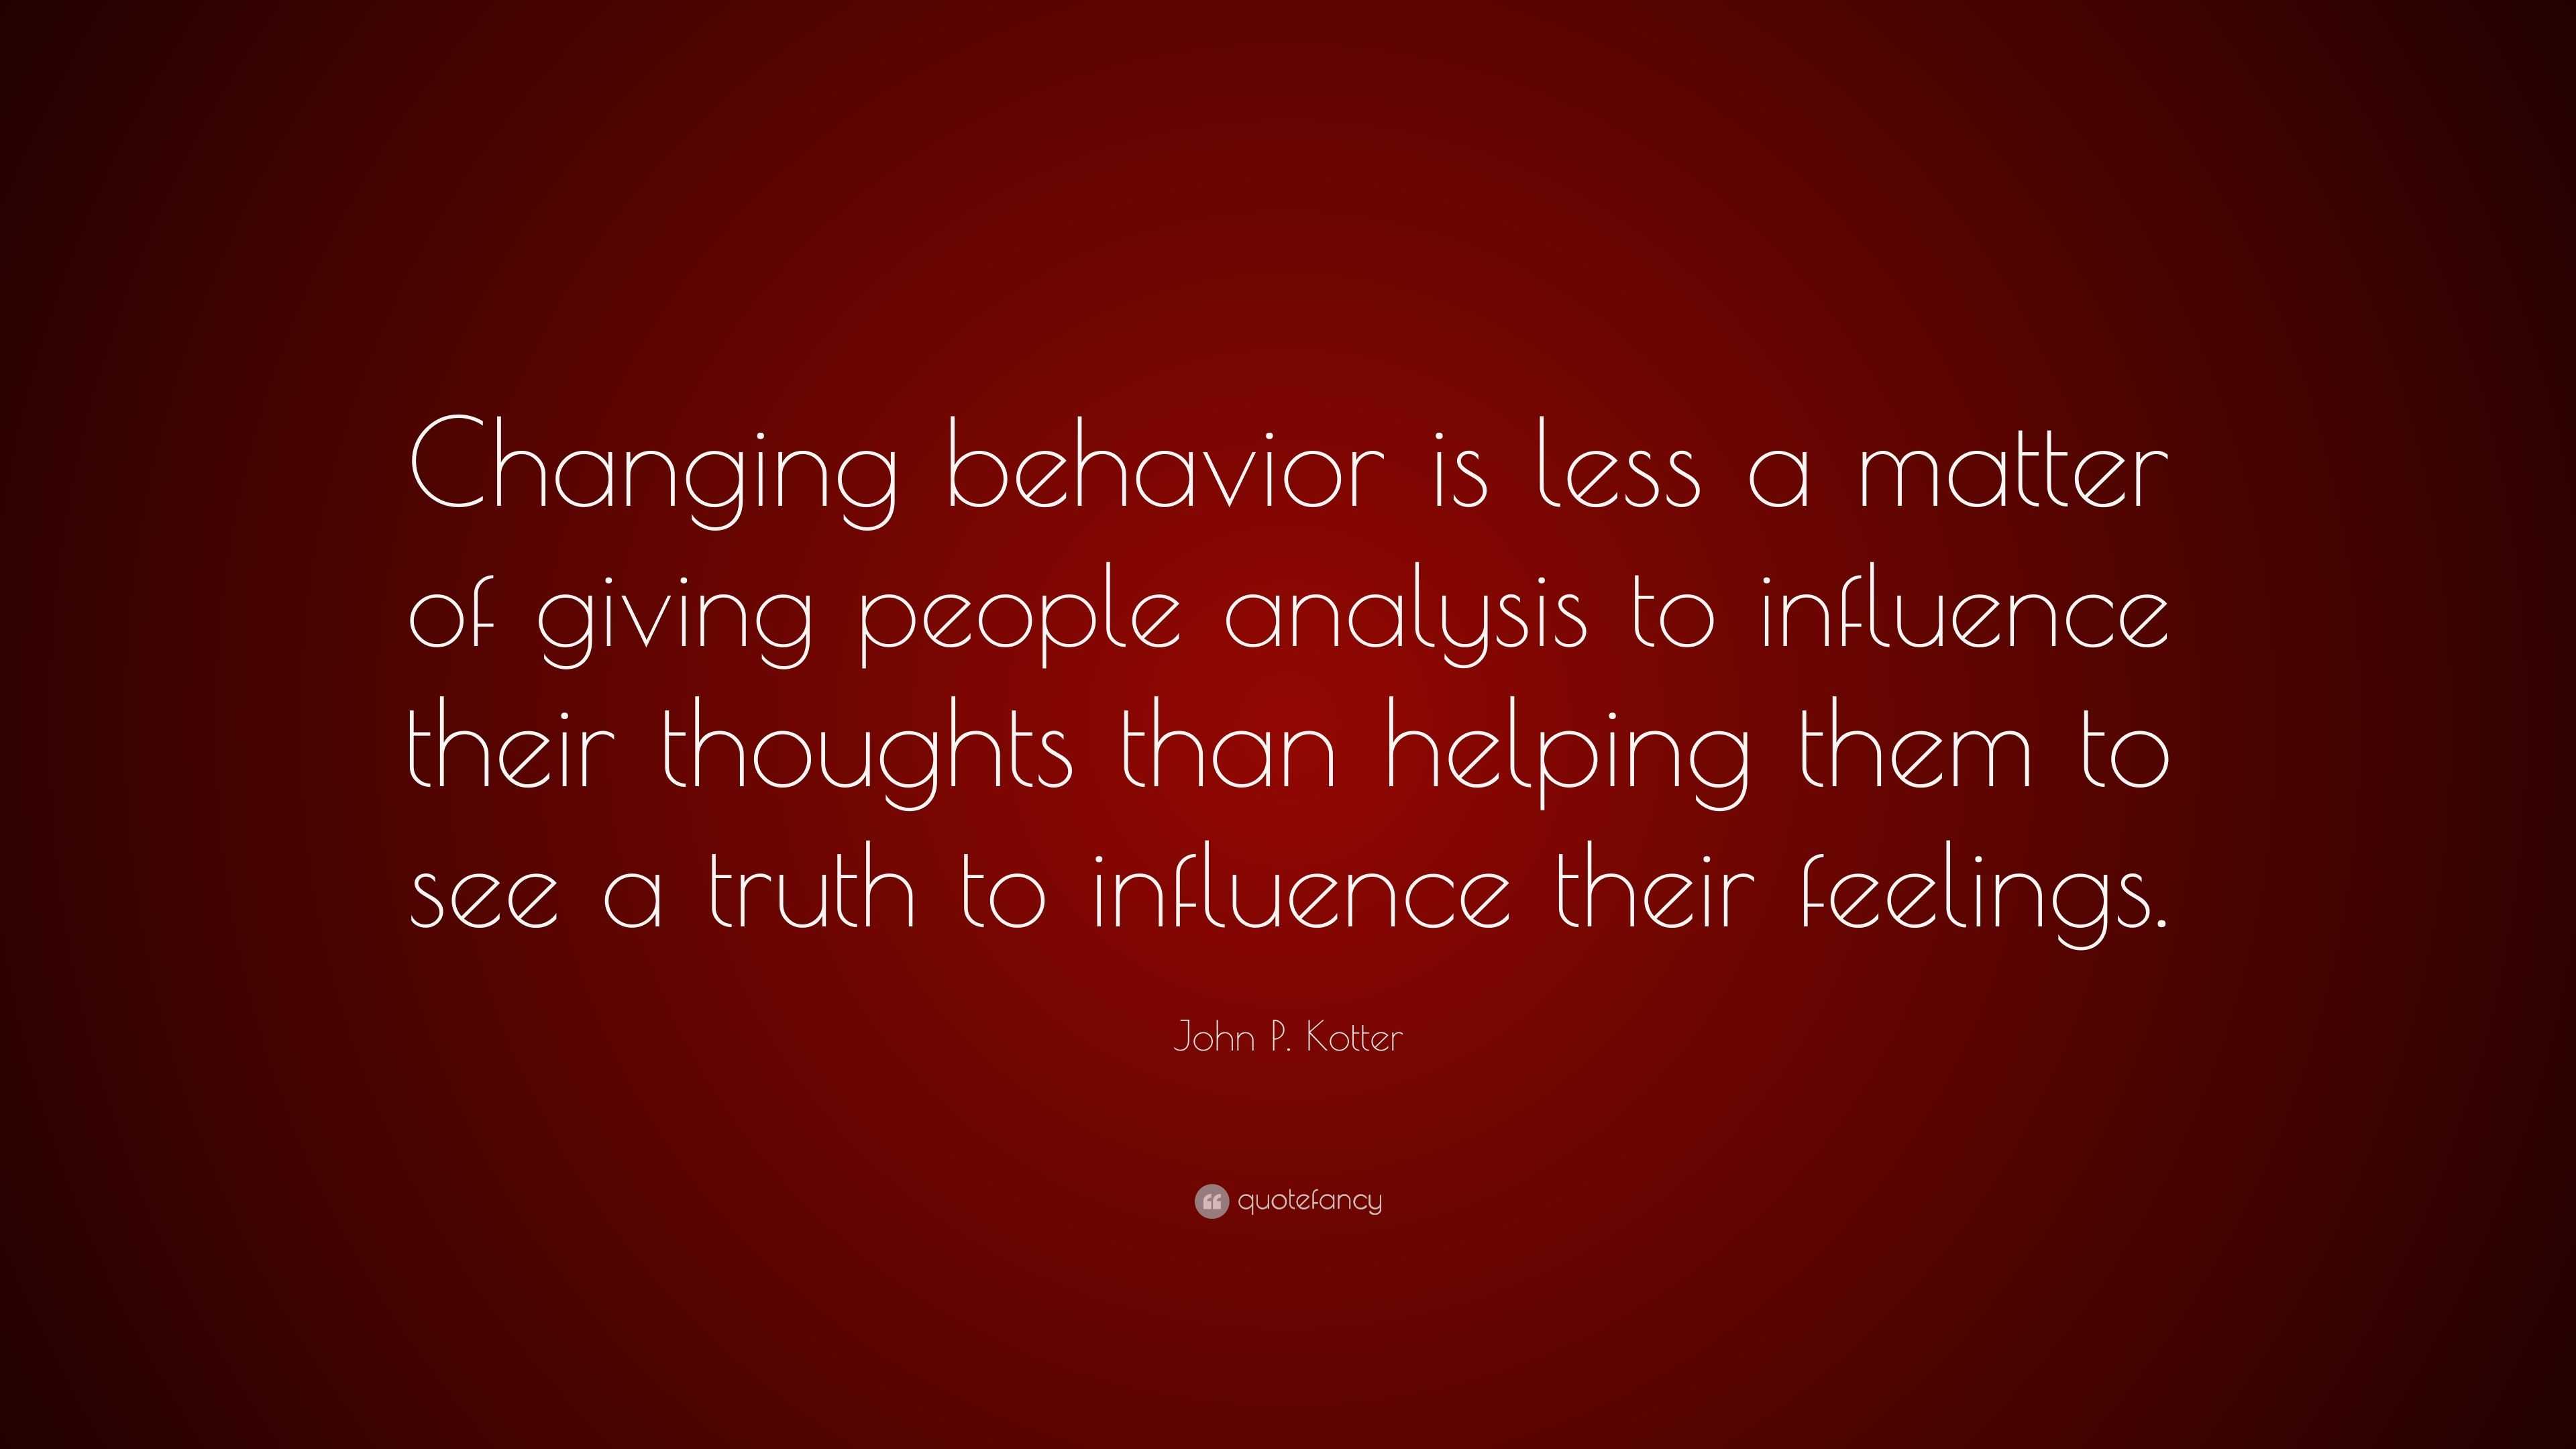 John P. Kotter Quote: “Changing behavior is less a matter of giving ...